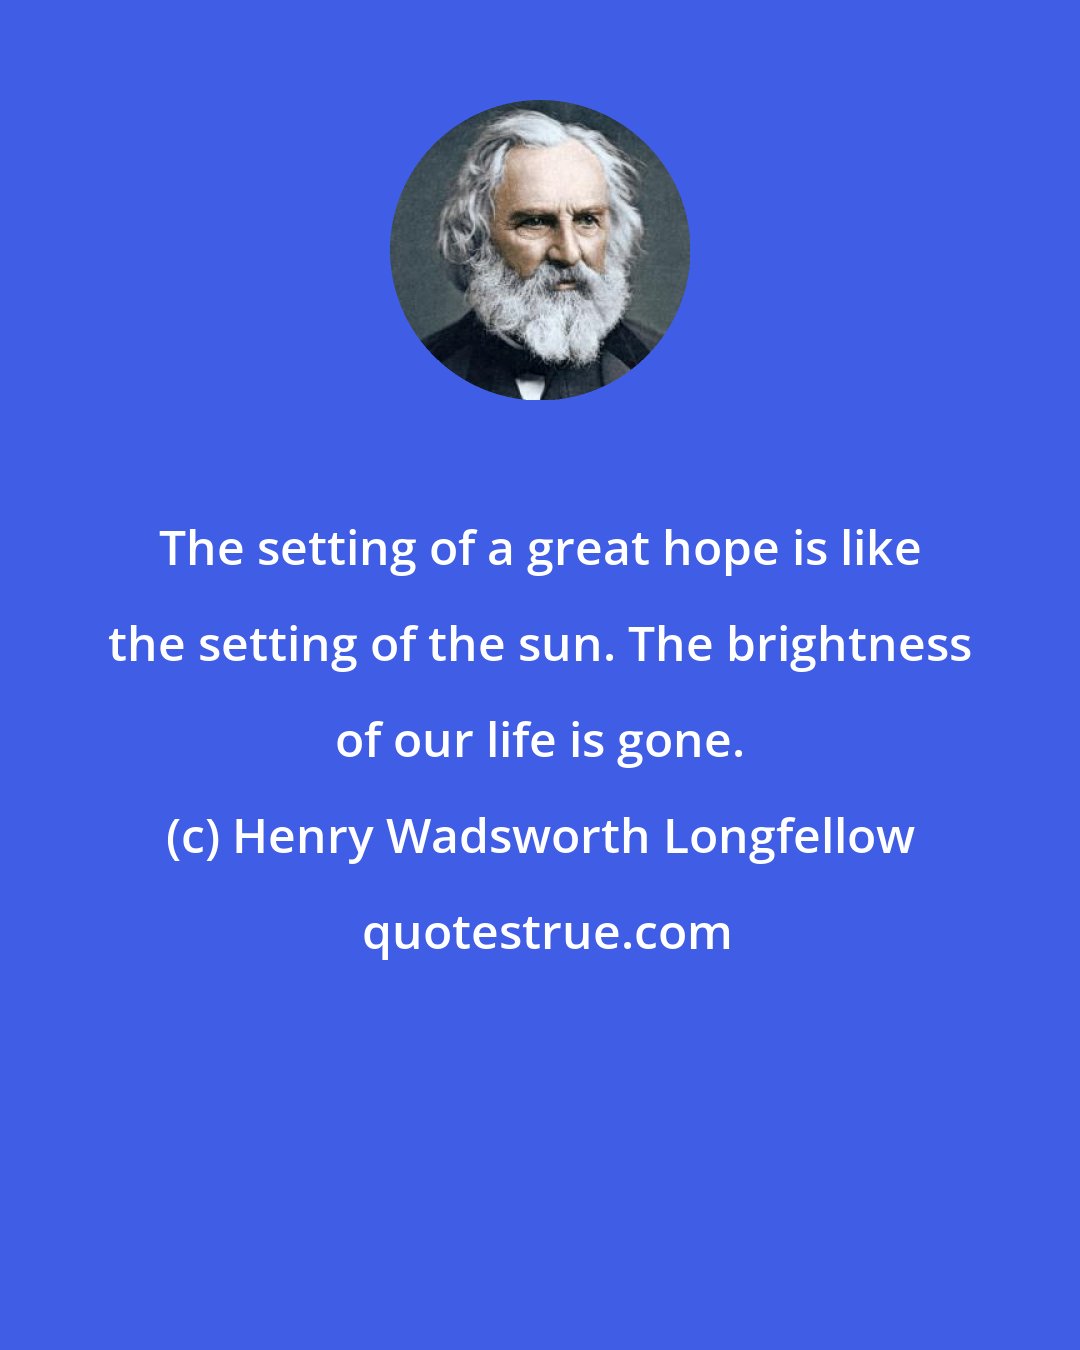 Henry Wadsworth Longfellow: The setting of a great hope is like the setting of the sun. The brightness of our life is gone.